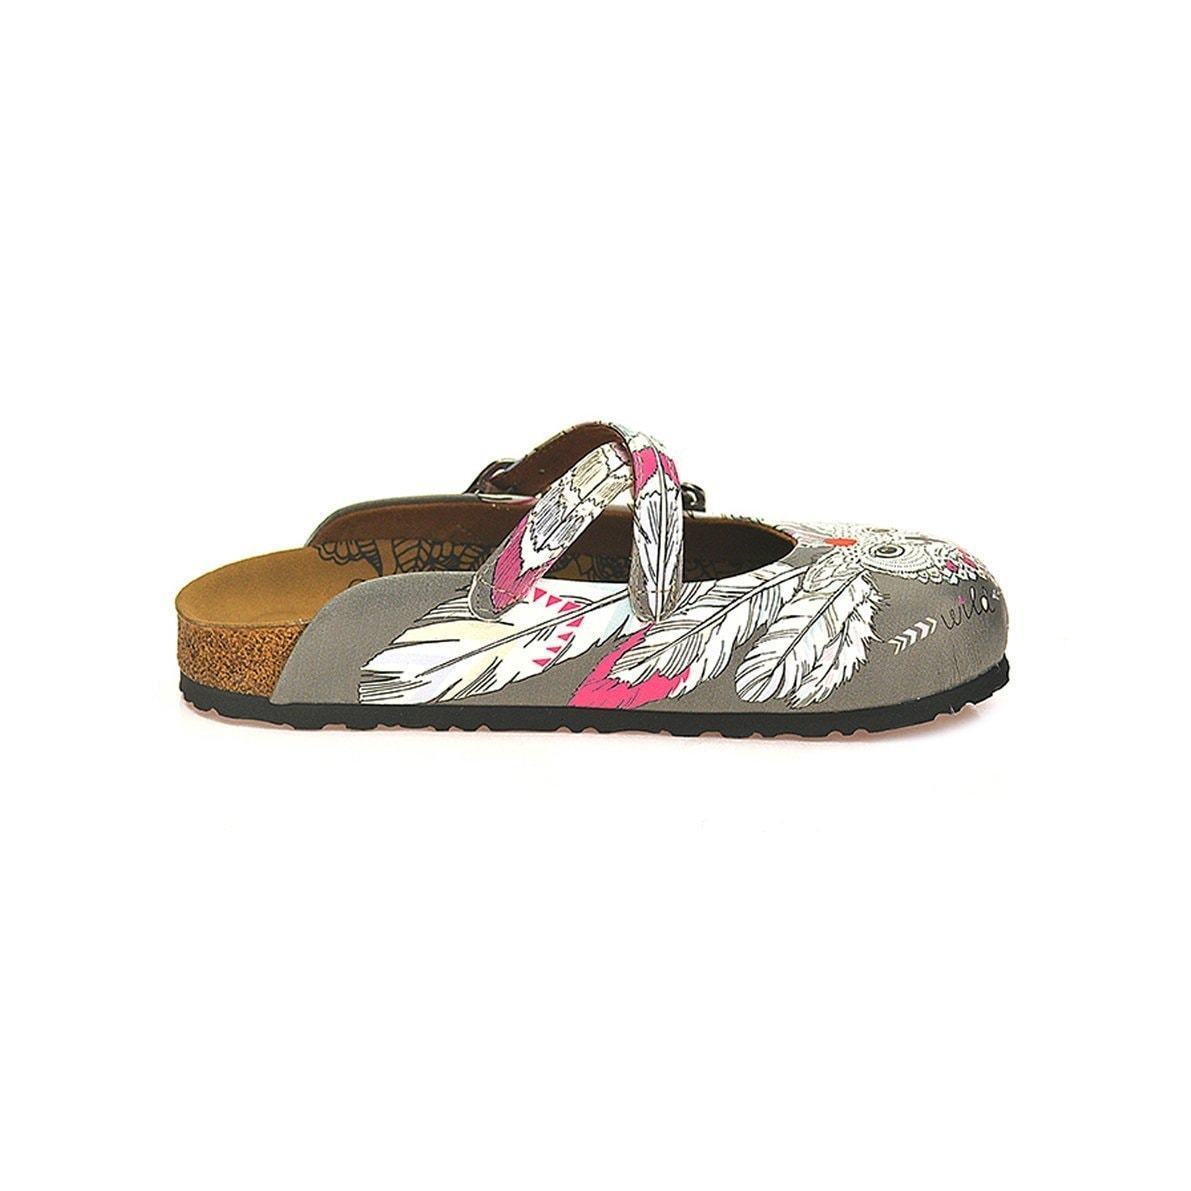 Gray Wild Free Owl Cross-Strap Clogs WCAL133 - Goby CALCEO Clogs 